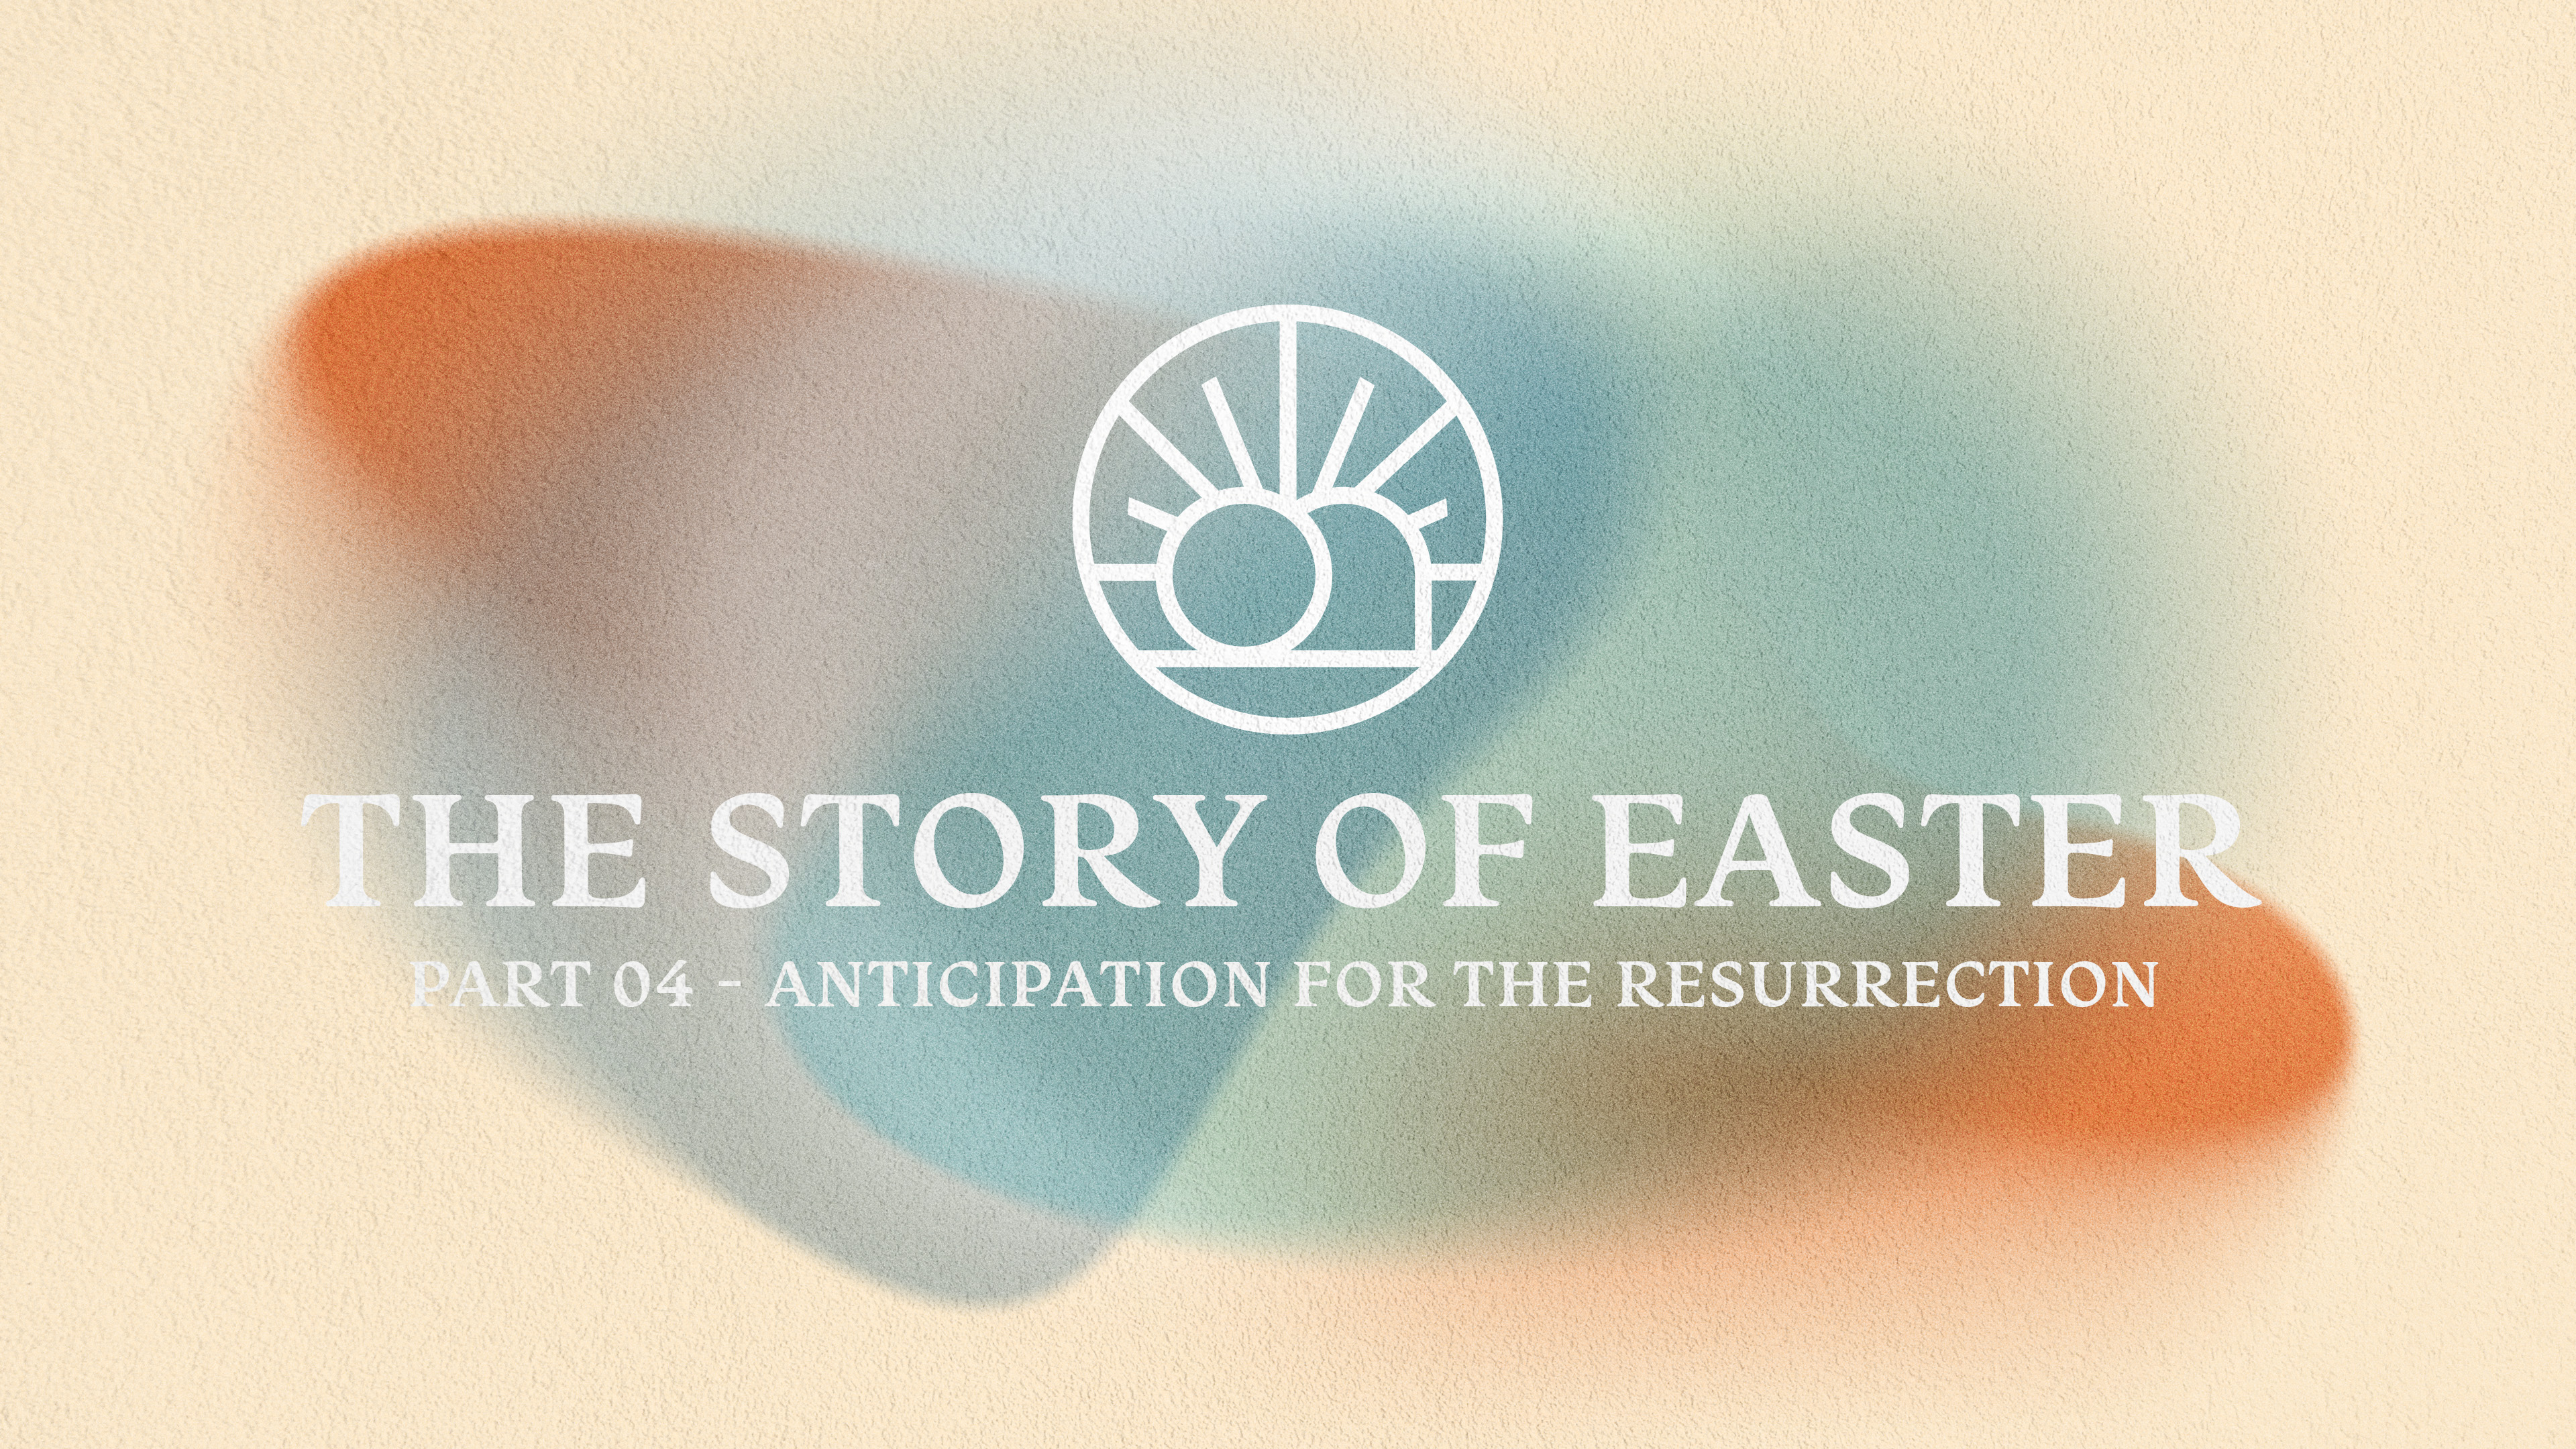 The Story of Easter Part 04